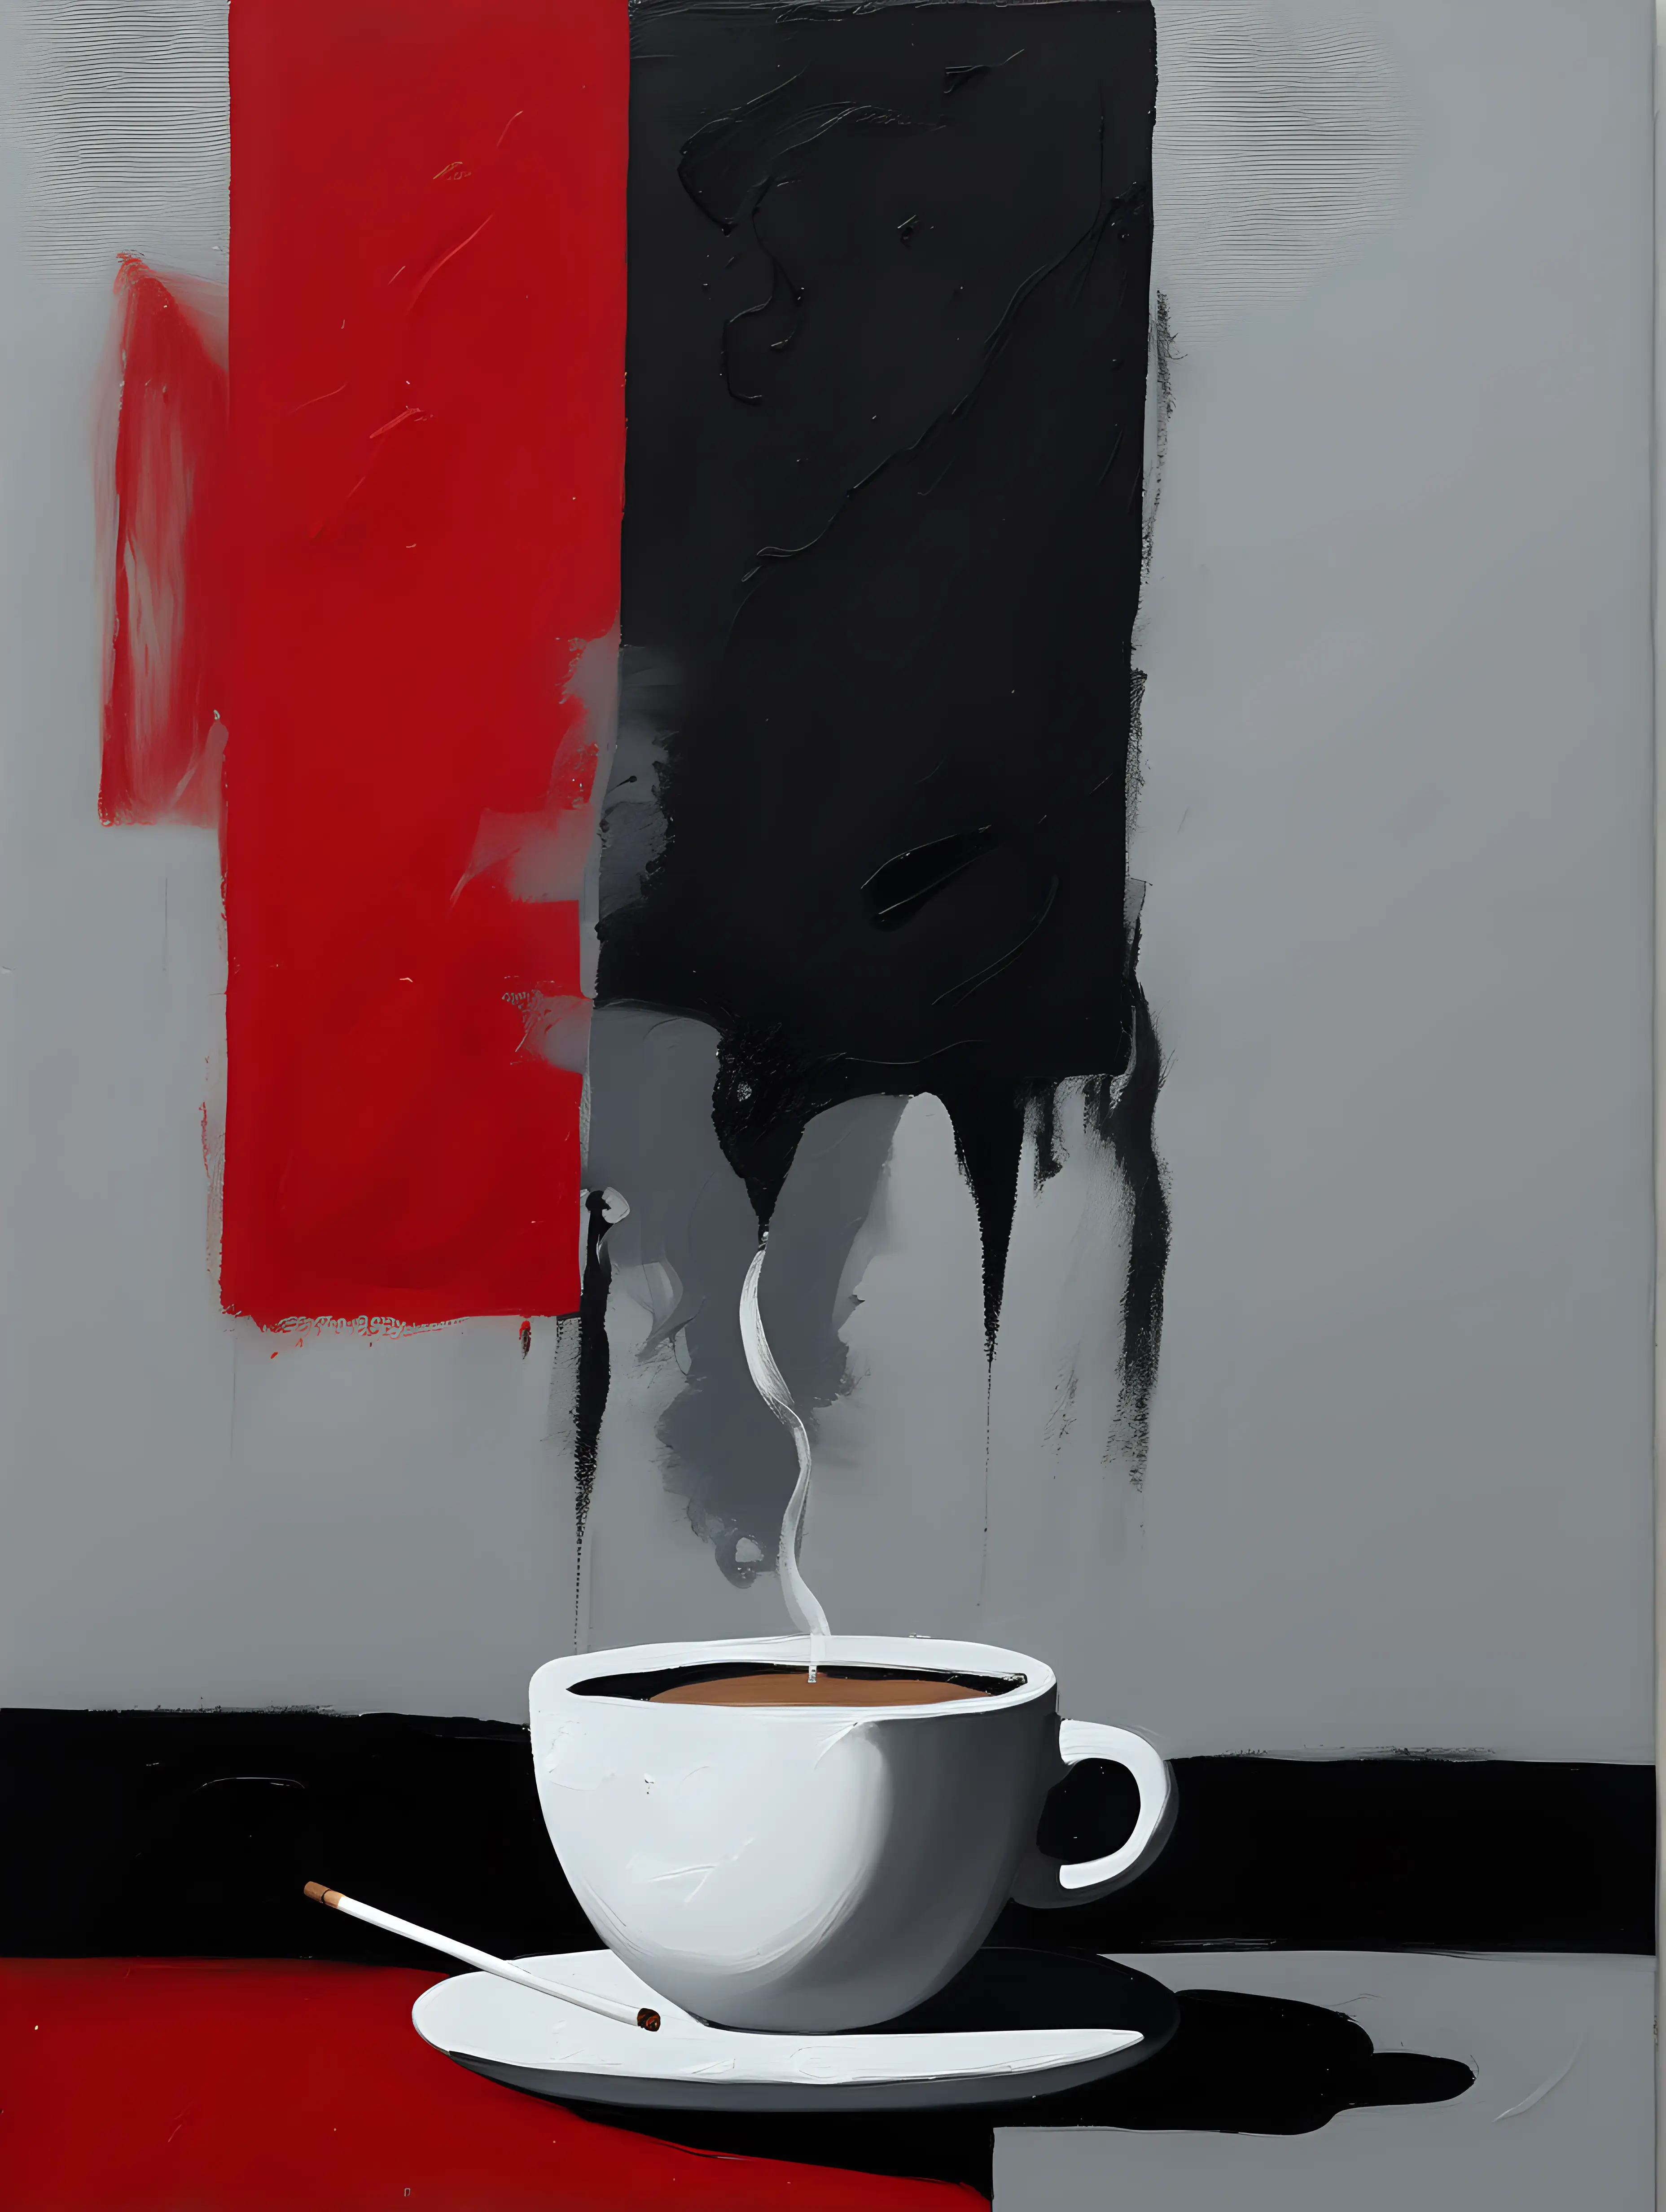 abstract painting, use palette of red, black and gray. coffe and cigarette, in a minimalist form